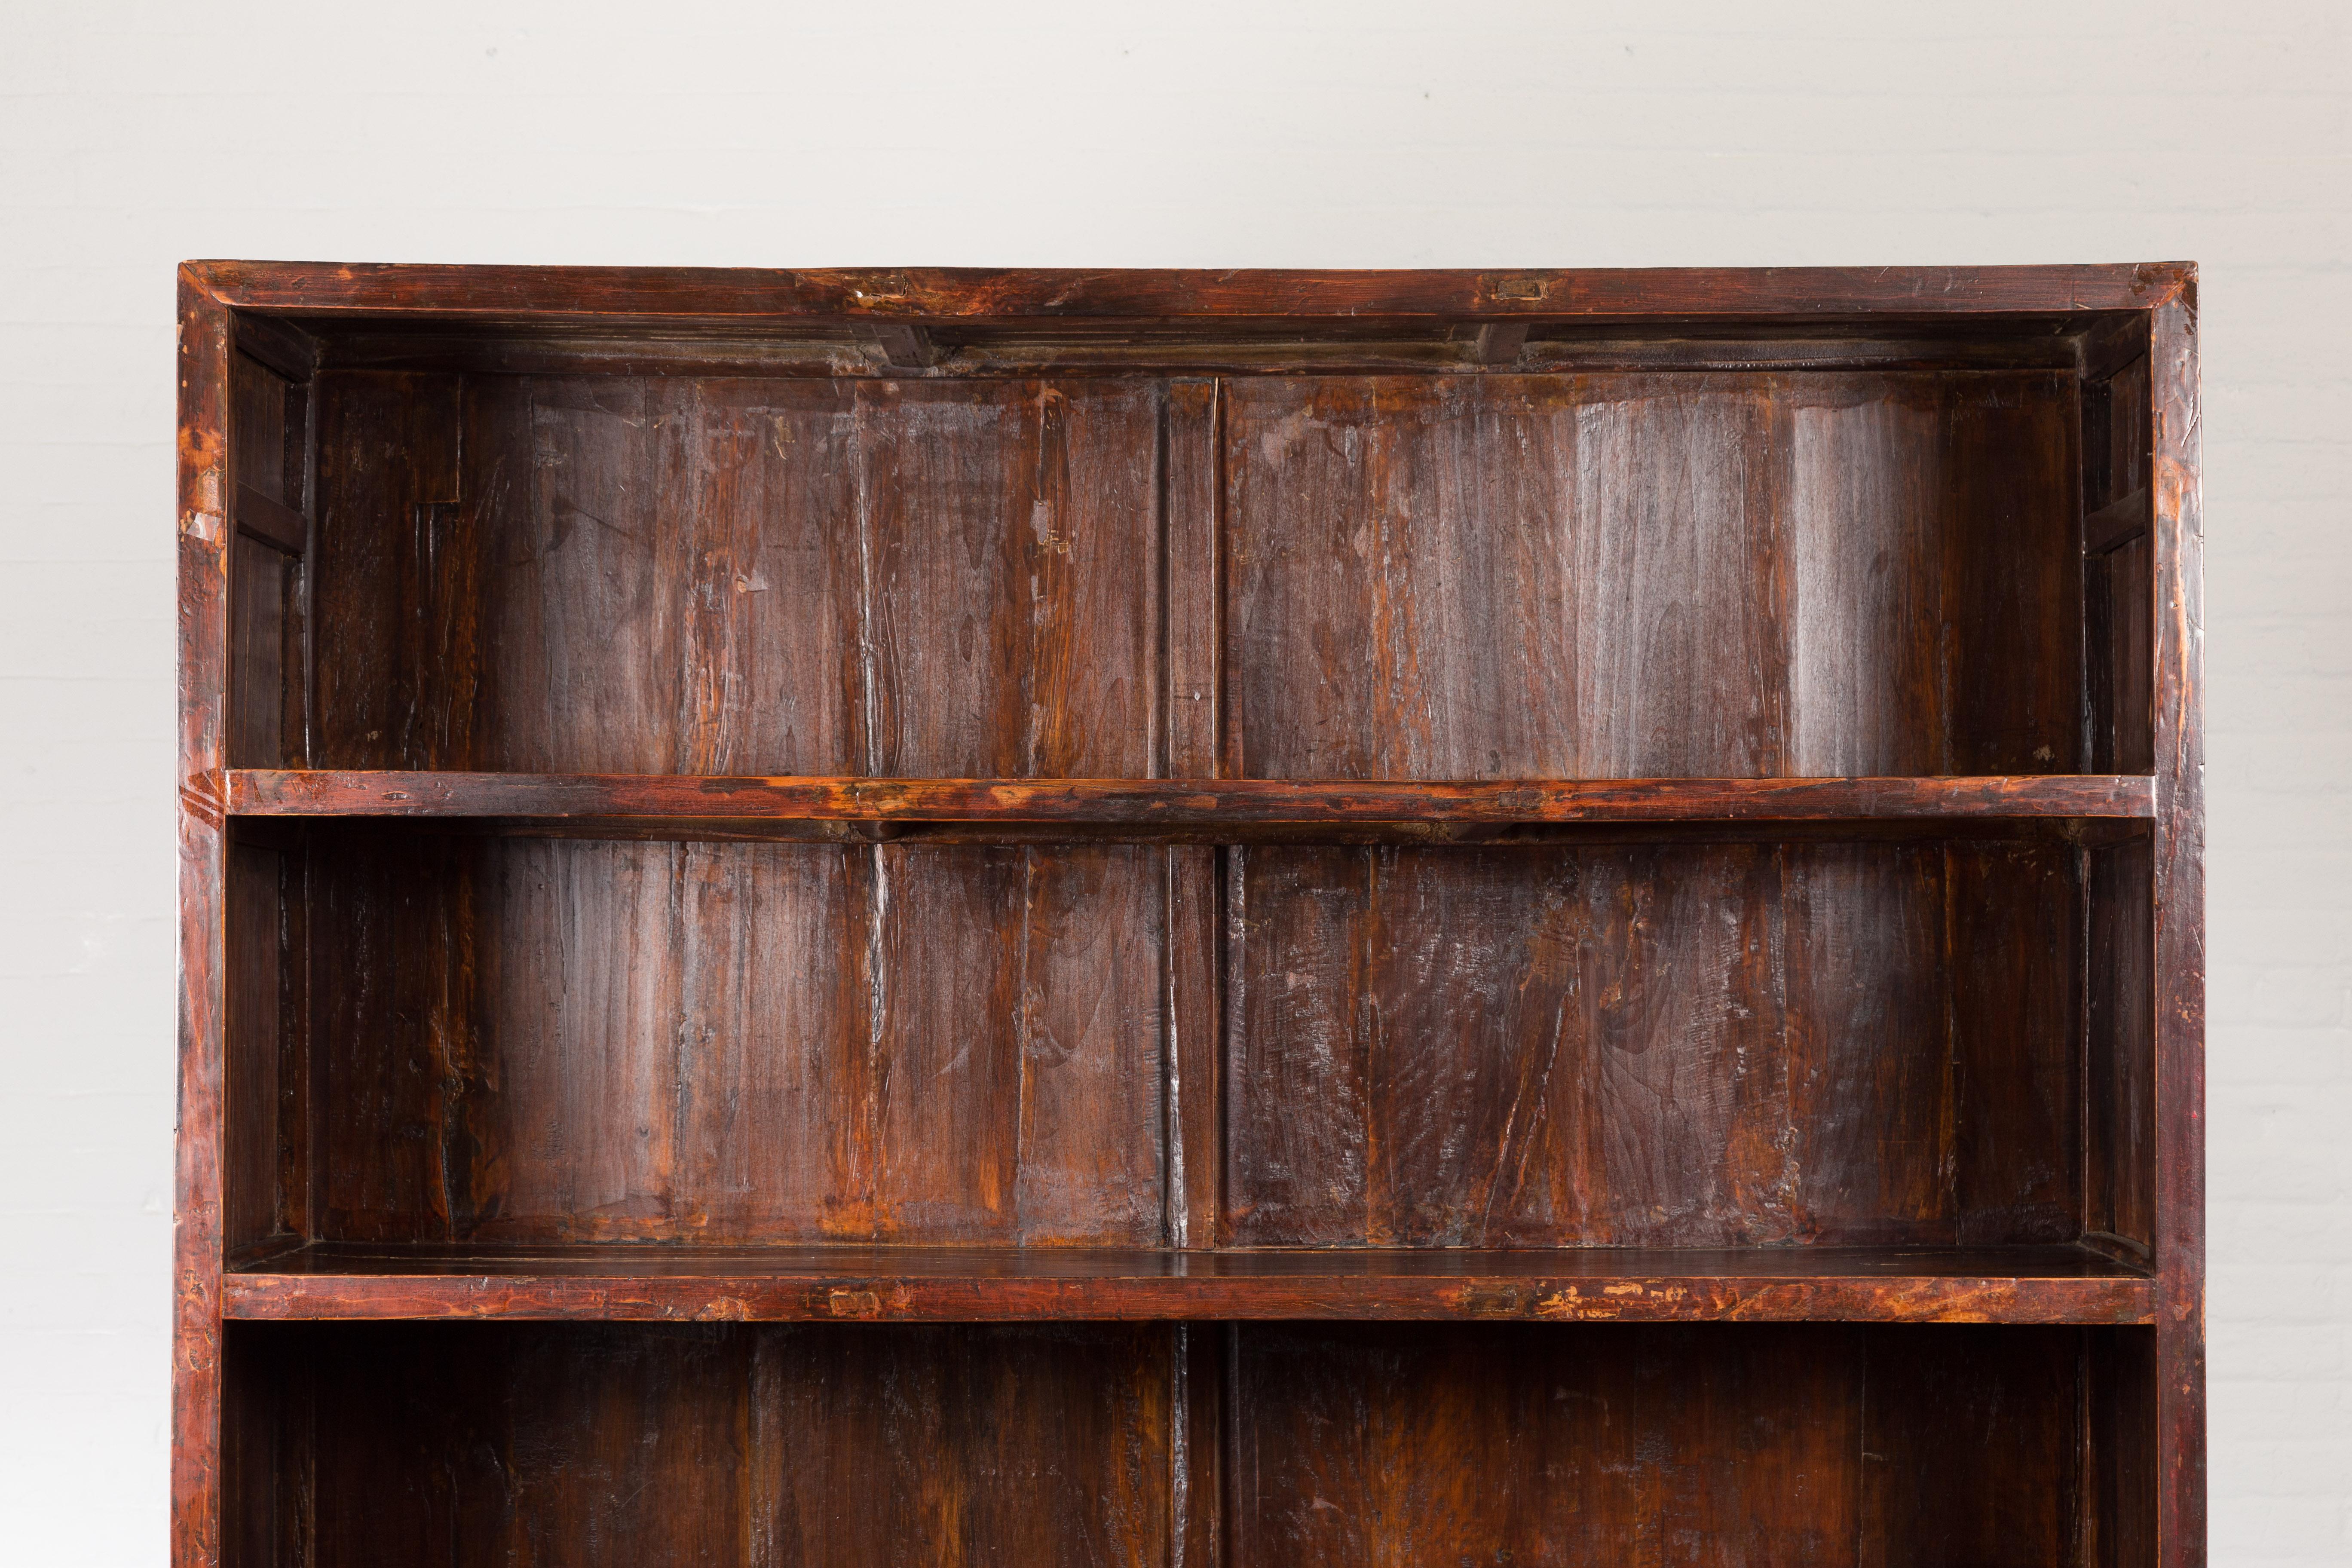 Chinese Qing Dynasty 19th Century Bookcase with Four Shelves and Dark Patina For Sale 1